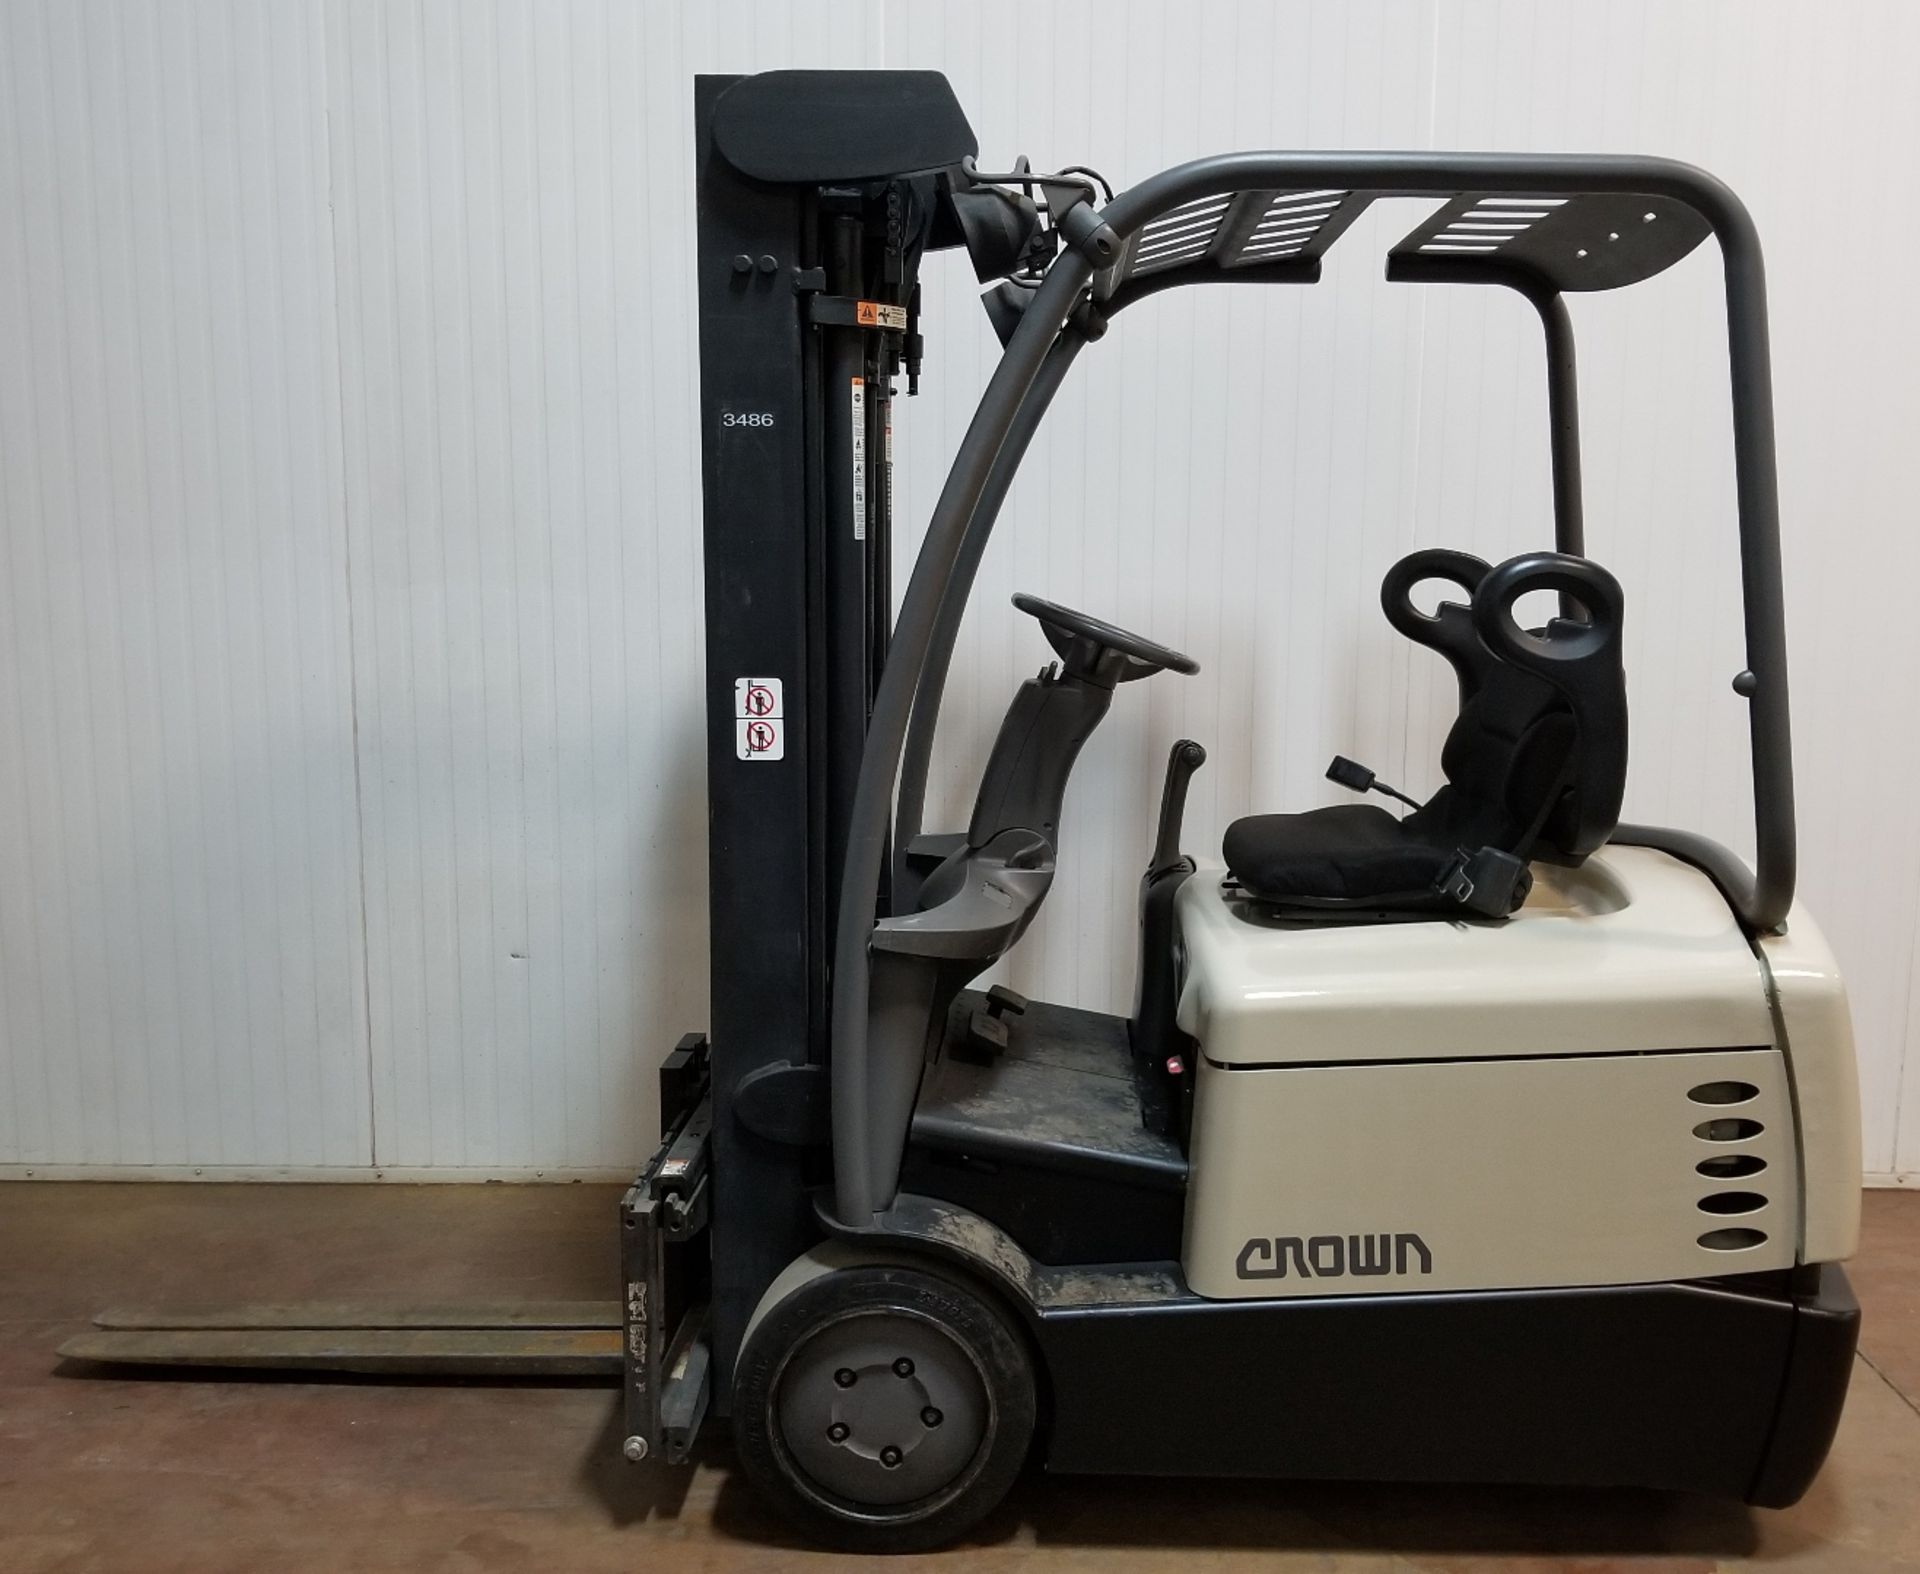 CROWN (2001) SC4020-30 2,750 LB. CAPACITY 36V ELECTRIC 3-WHEEL FORKLIFT WITH 190" MAX. LIFT - Image 2 of 2